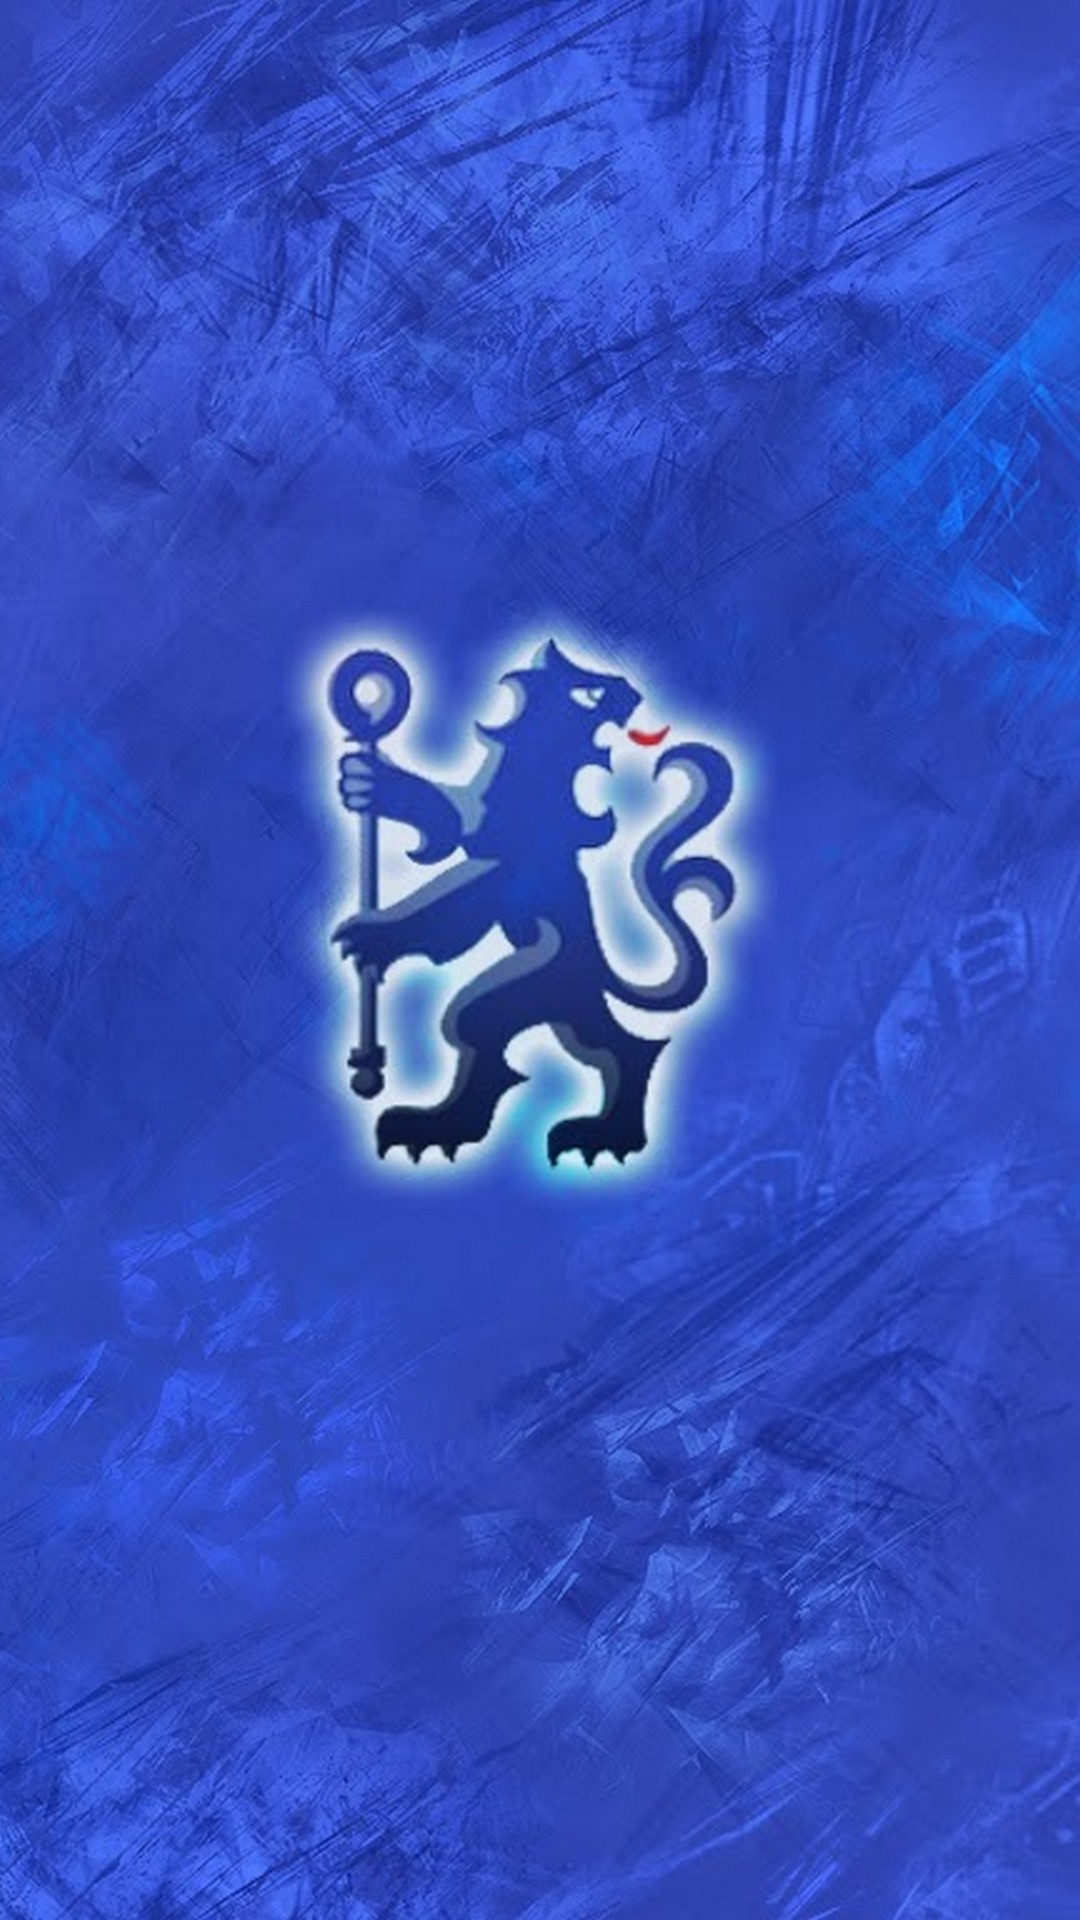 Chelsea Football Wallpaper iPhone HD With Resolution 1080X1920 pixel. You can make this wallpaper for your Mac or Windows Desktop Background, iPhone, Android or Tablet and another Smartphone device for free